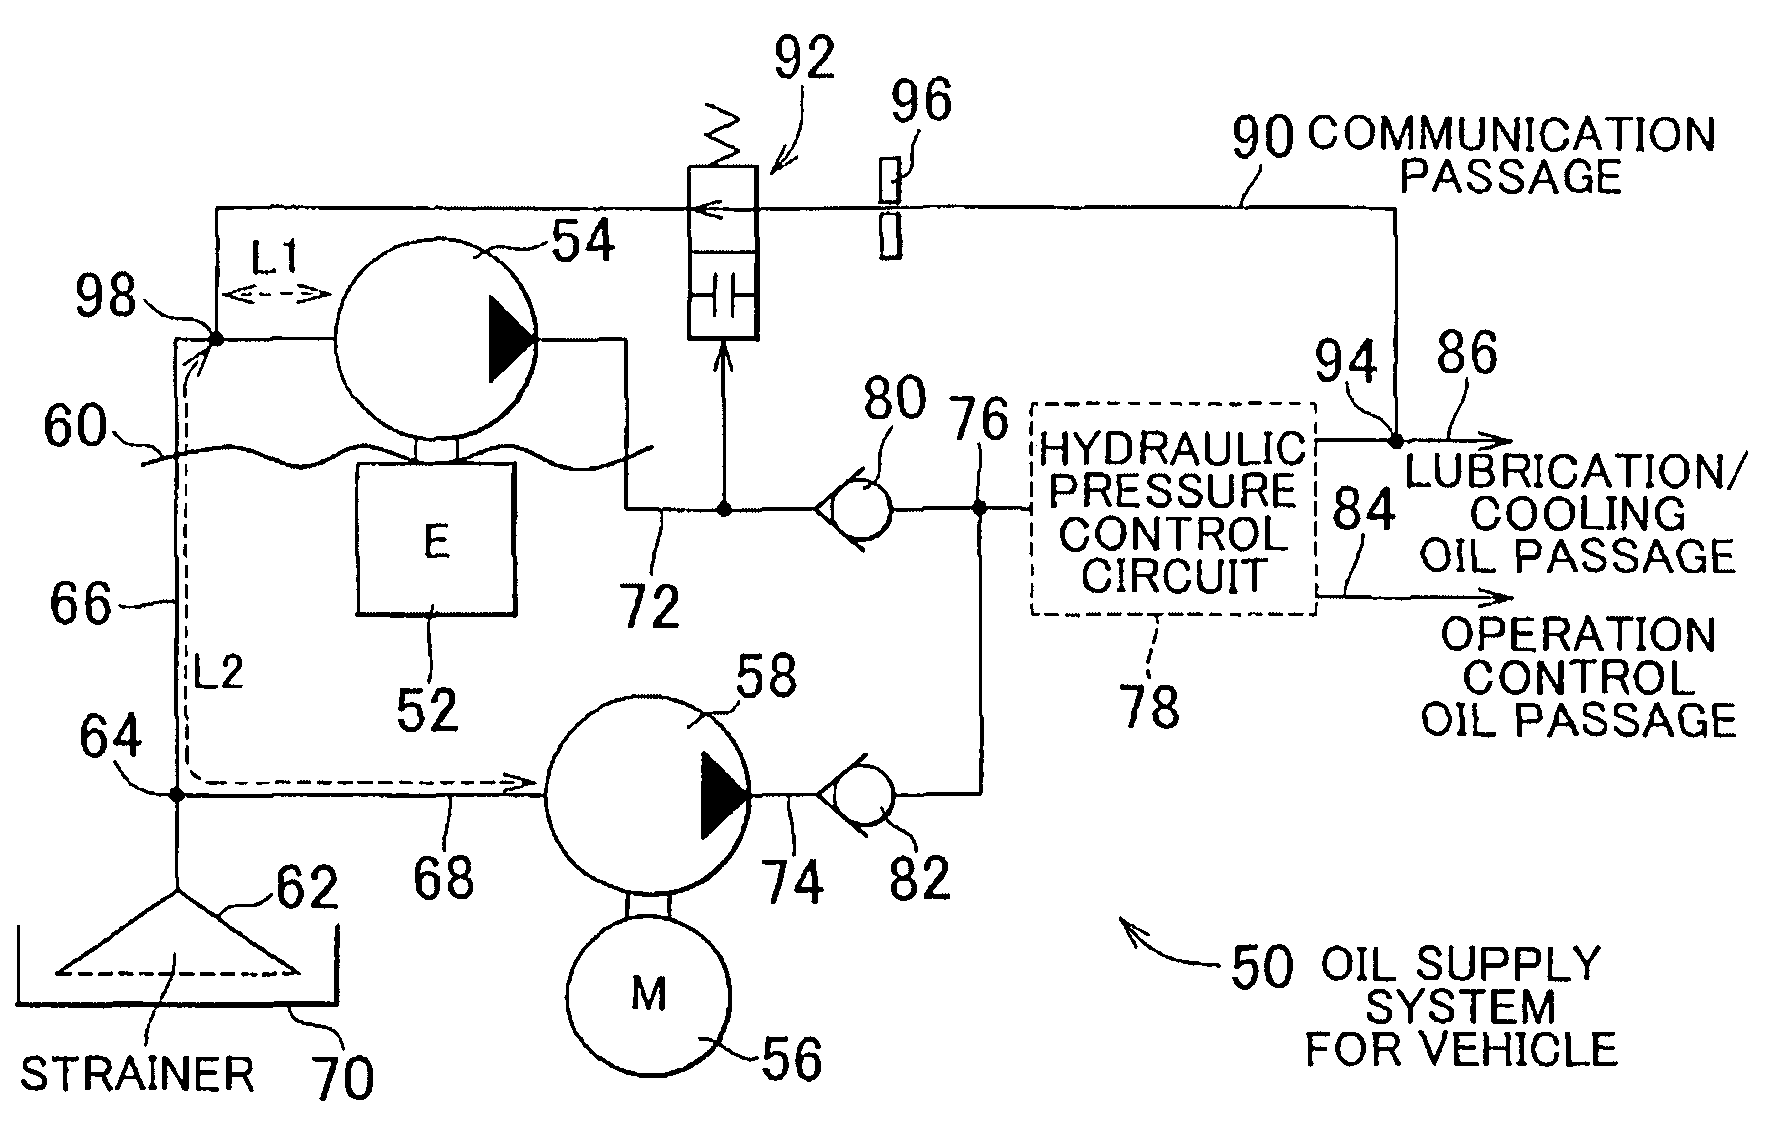 Oil supply system for vehicle